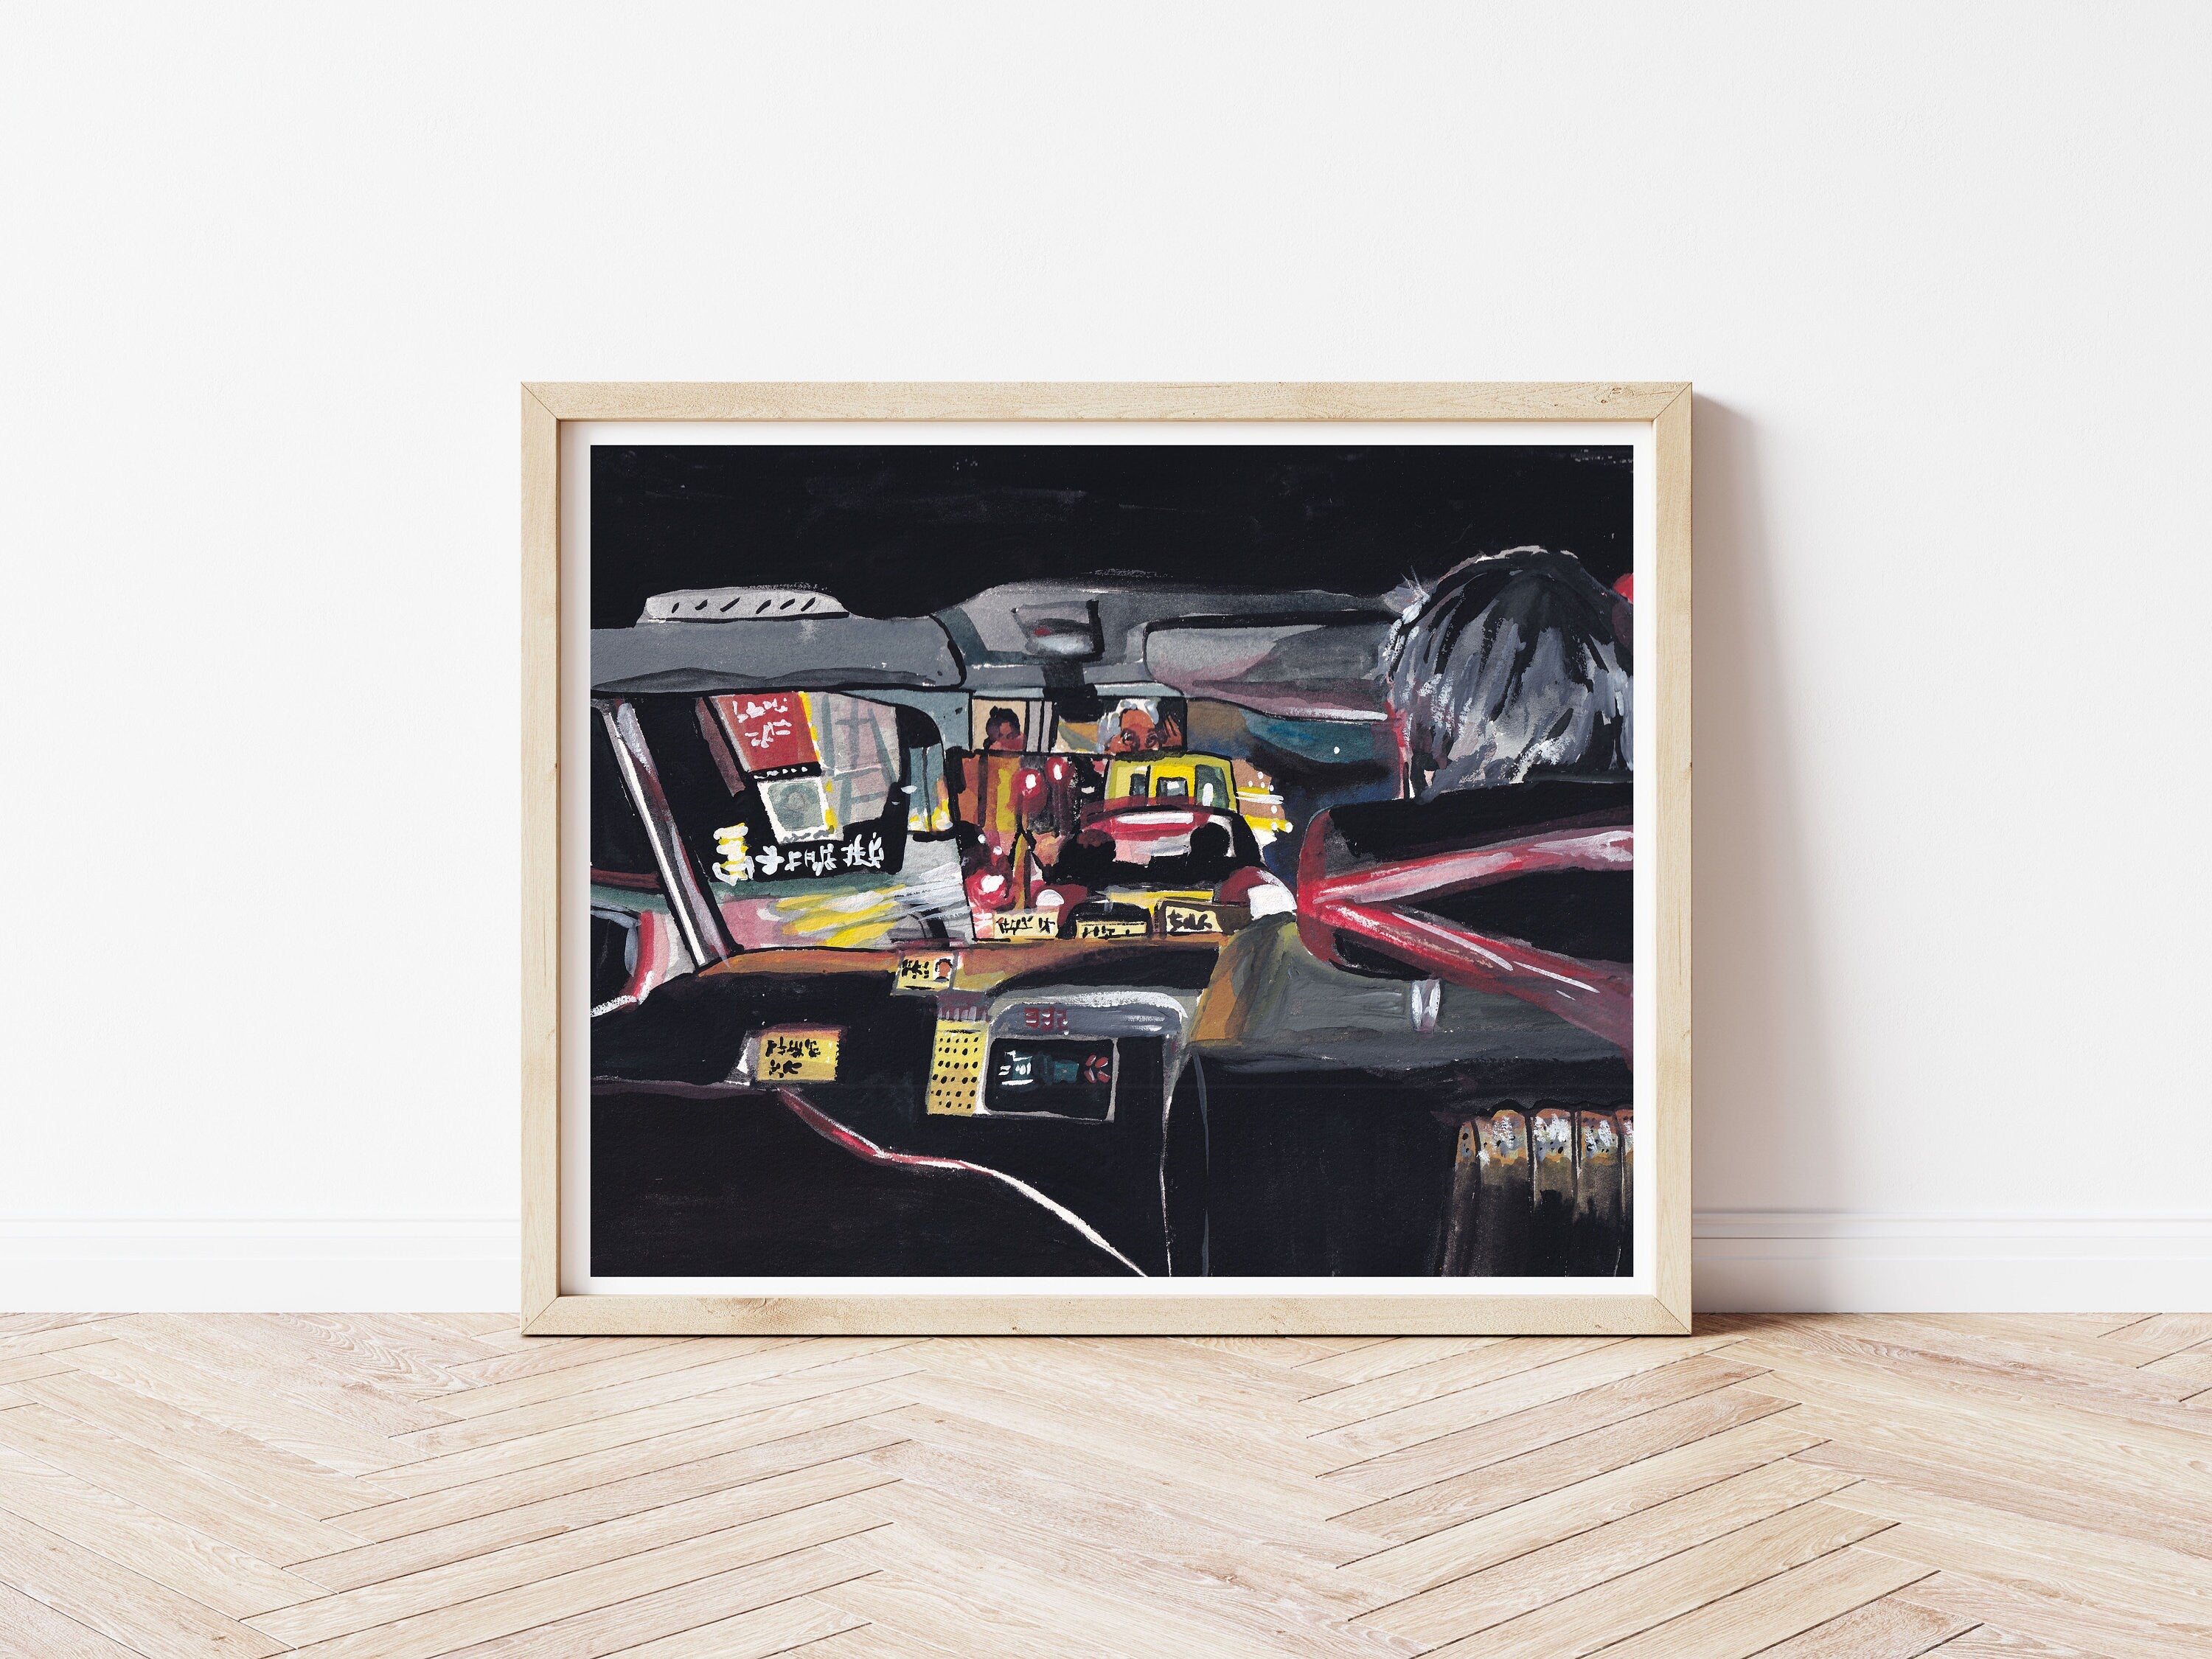 Hong Kong taxi print of painting by Medjool Studio. Print of original gouache painting of a view looking out of a Hong Kong taxi at night. 